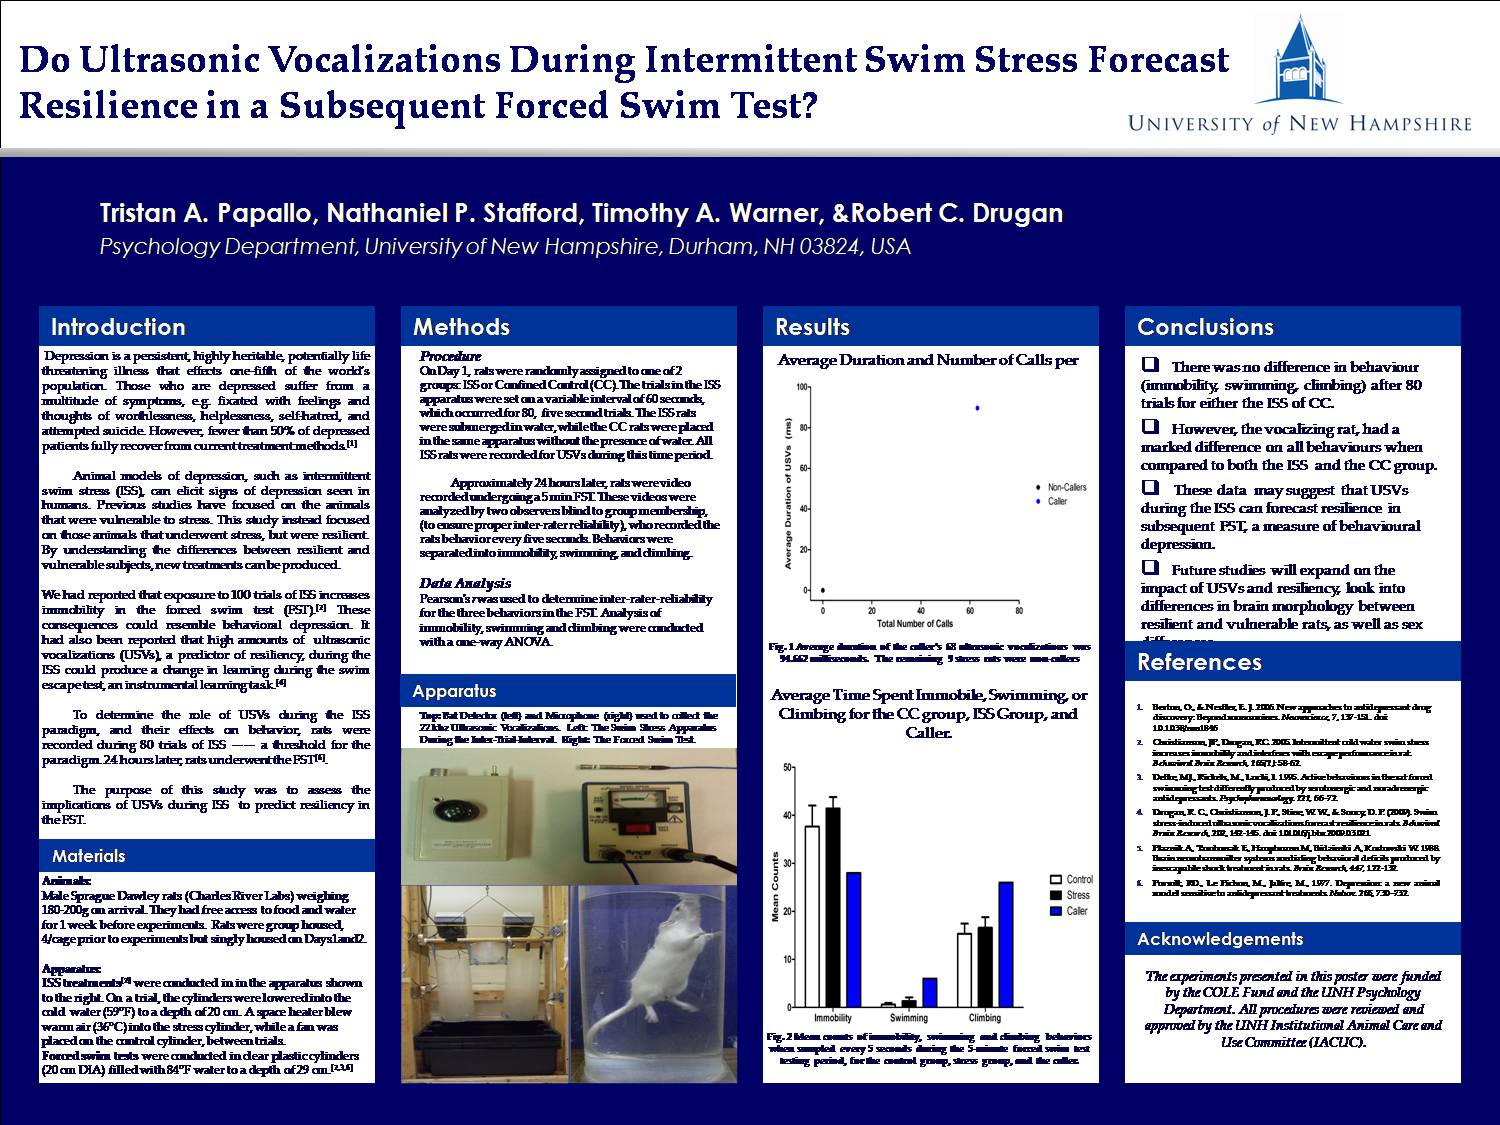 Do Ultrasonic Vocalizations During Intermittent Swim Stress Forecast Resilience In A Subsequent Forced Swim Test? by tao39